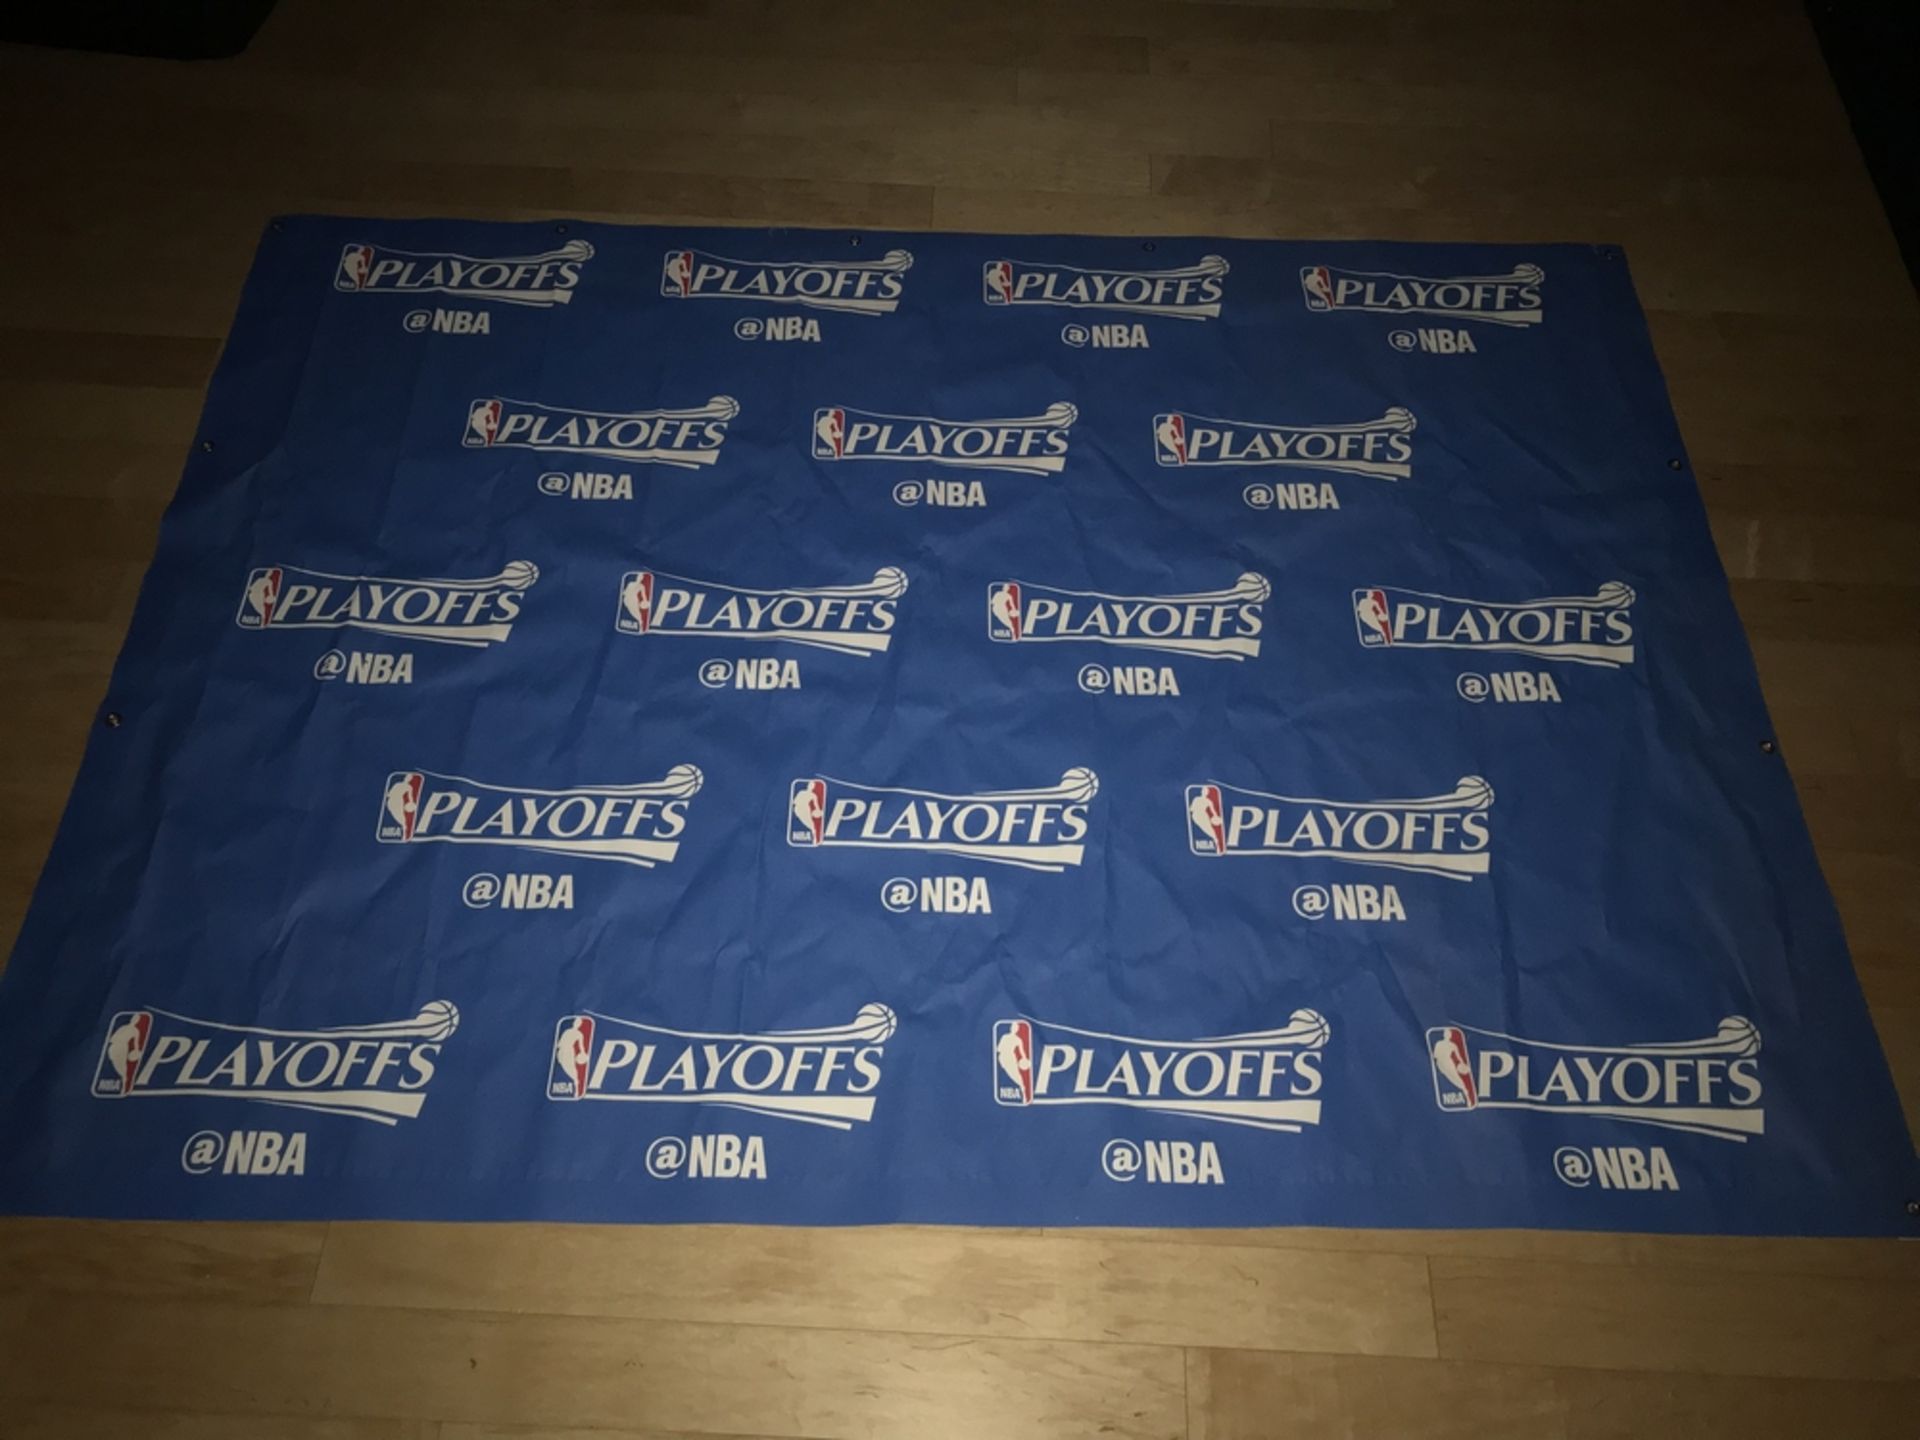 NBA Playoffs - Back Drop - Vinyl , Dim. 83 in x 60 in , Location: Media Rm. ***Note from